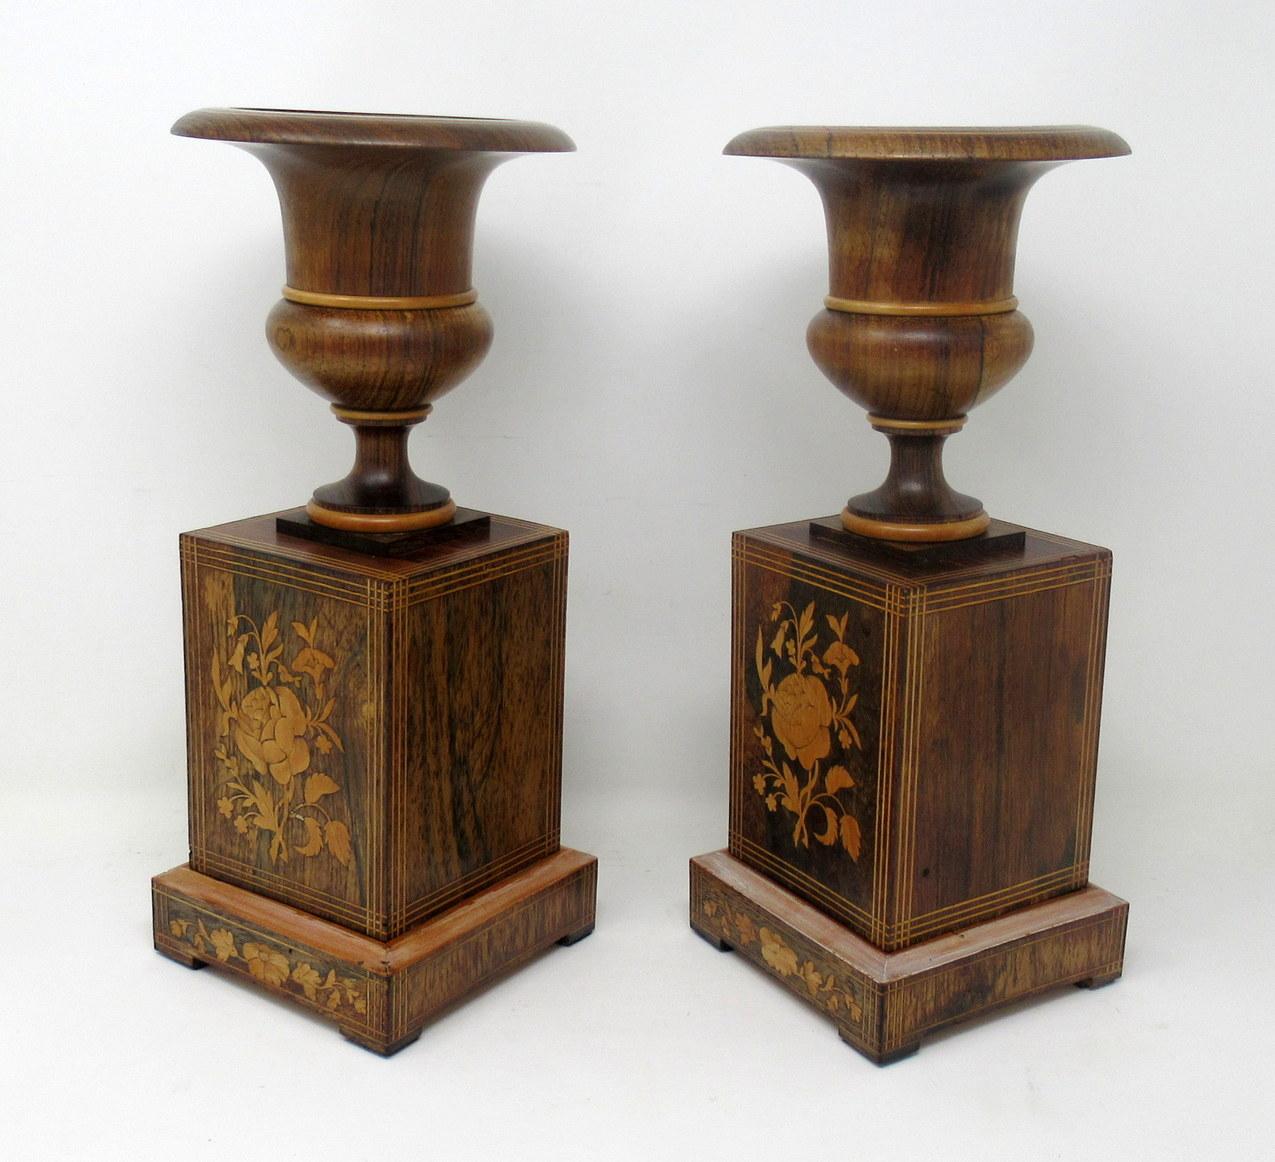 20th Century Antique Vintage Pair Wooden Treen Carved Rosewood Candlesticks Urns Mid Century